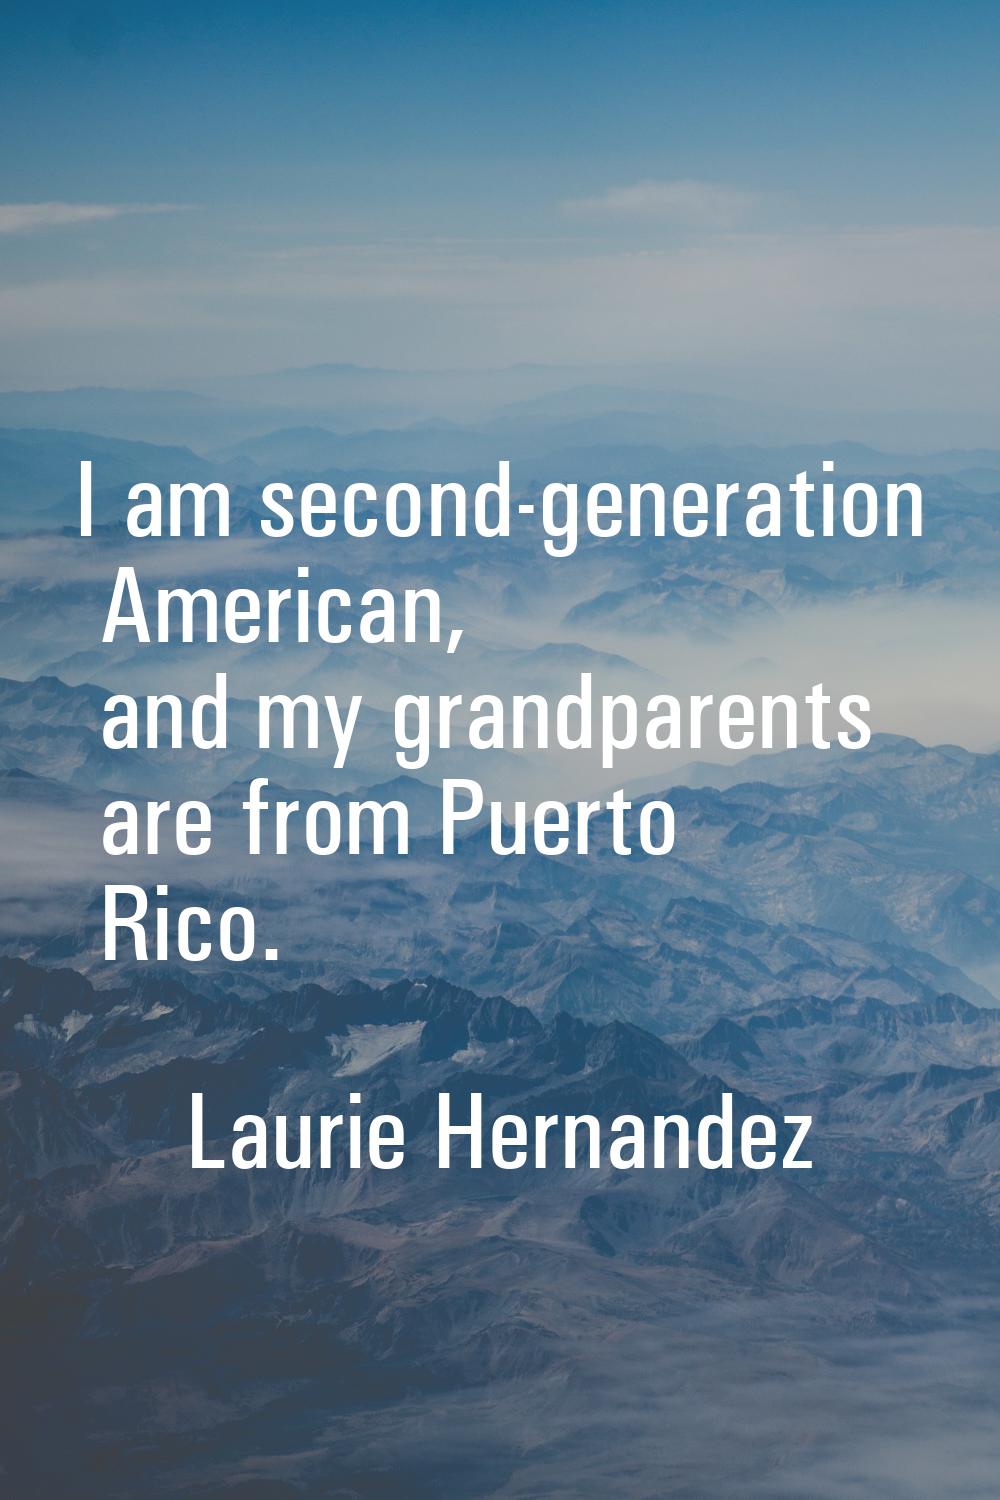 I am second-generation American, and my grandparents are from Puerto Rico.